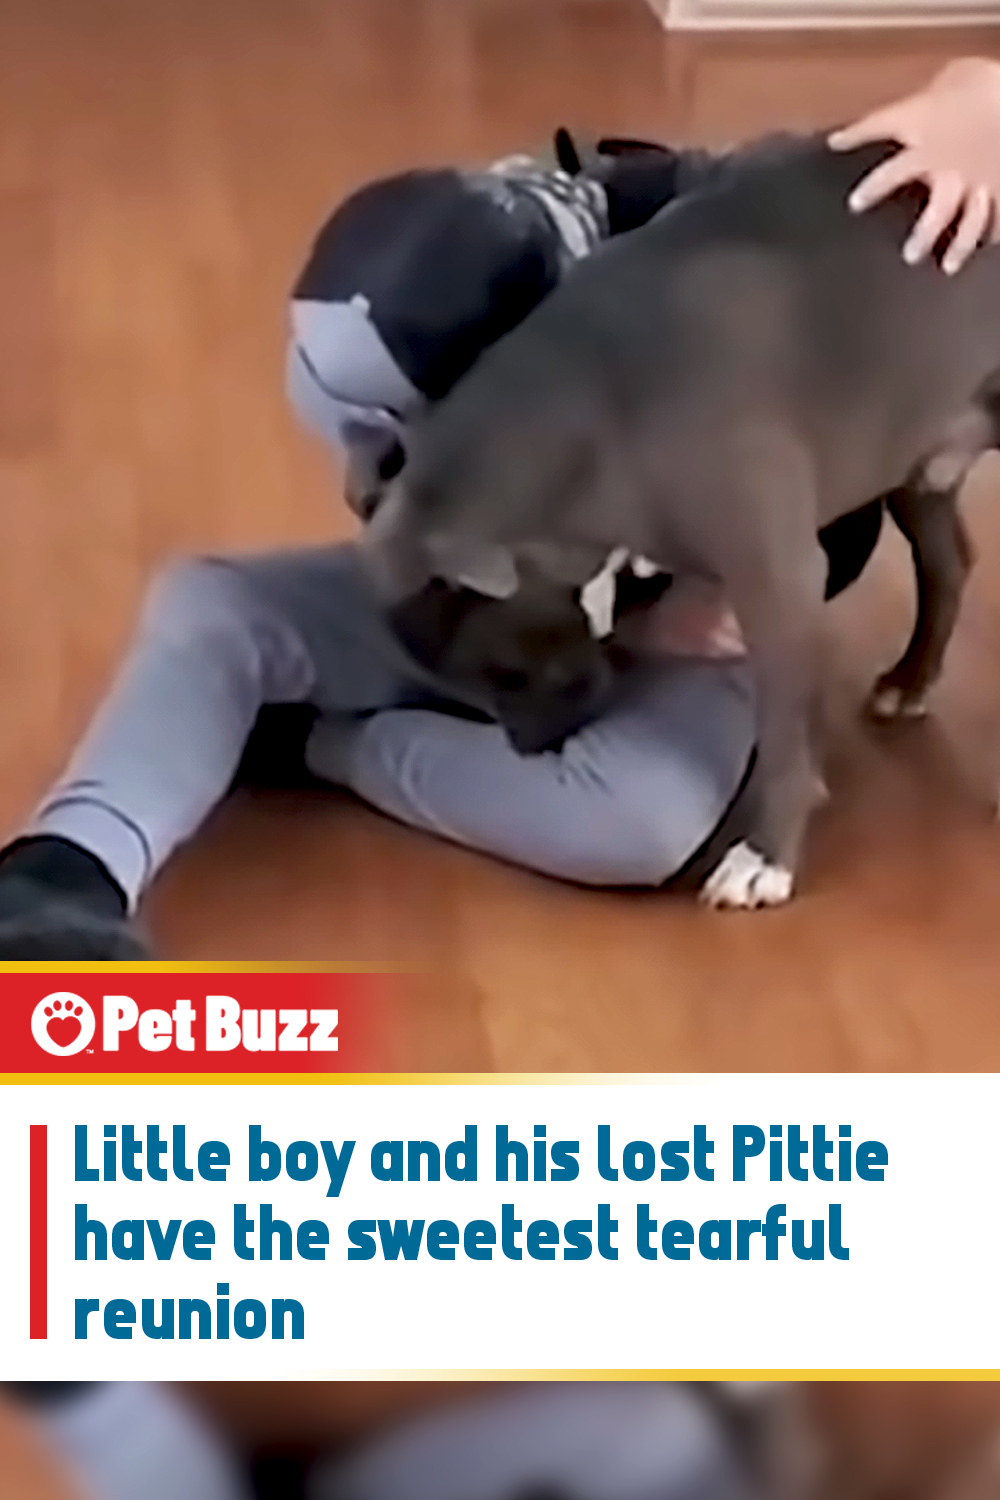 Little boy and his lost Pittie have the sweetest tearful reunion